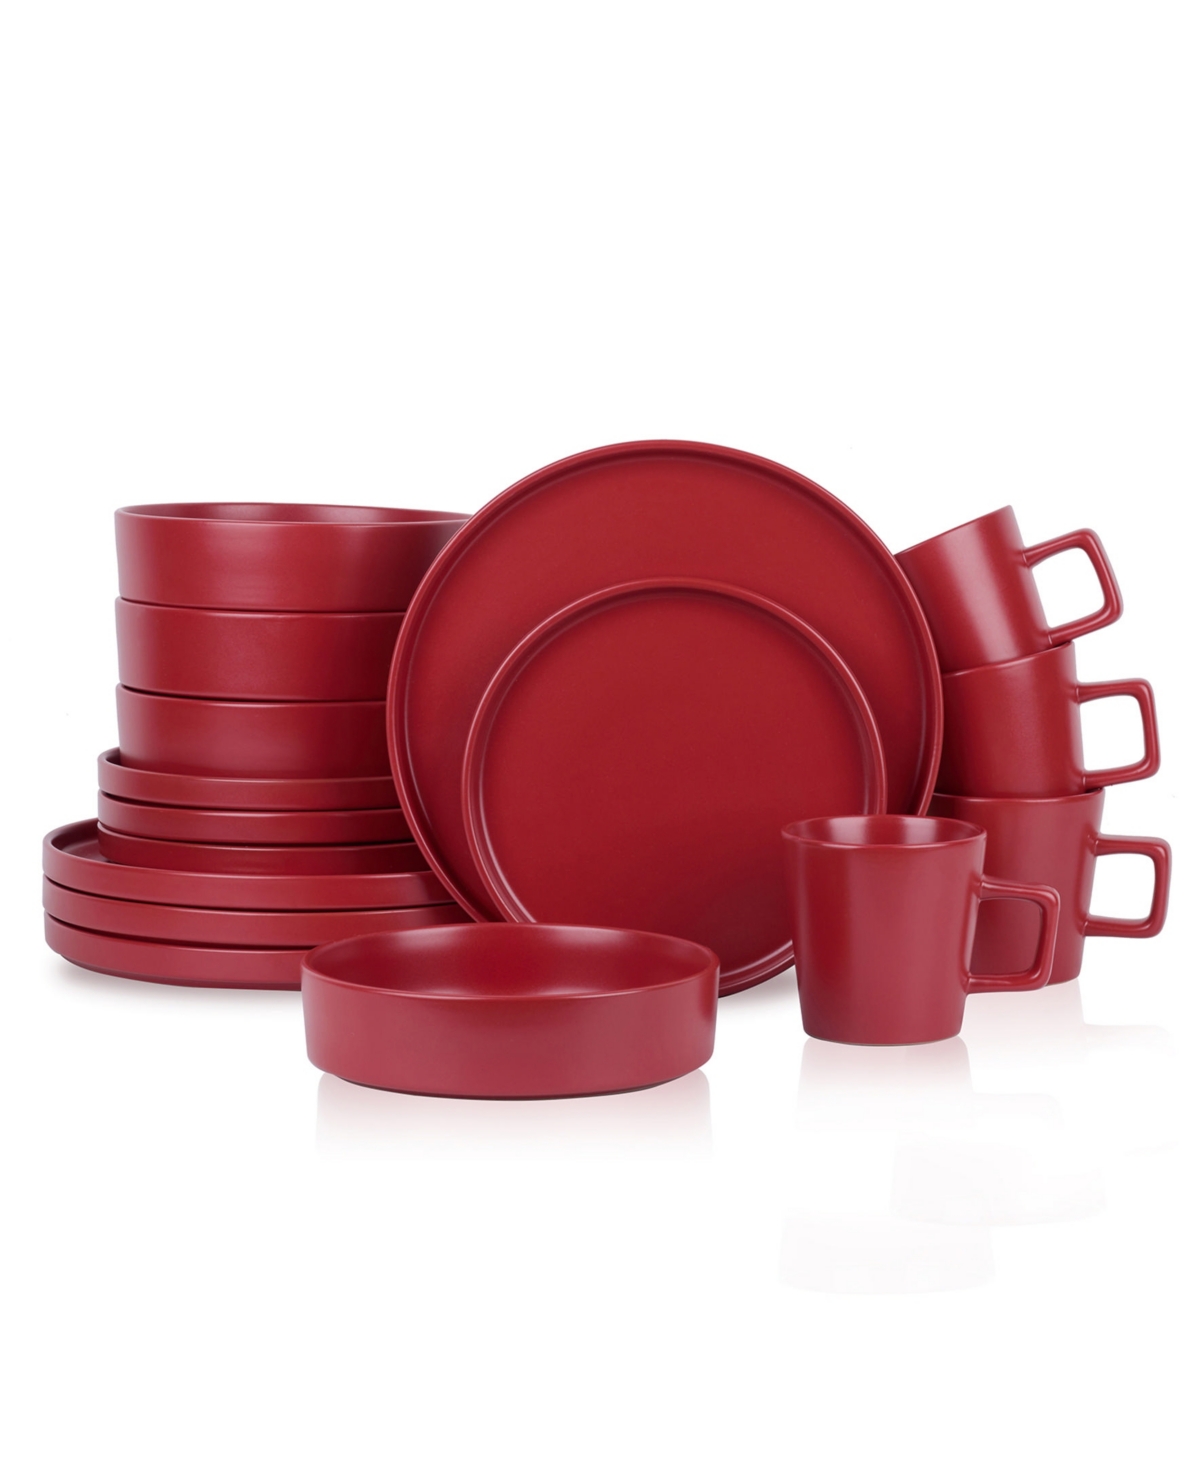 Cleo 16 Piece Stoneware Full Set, Service for 4 - Red